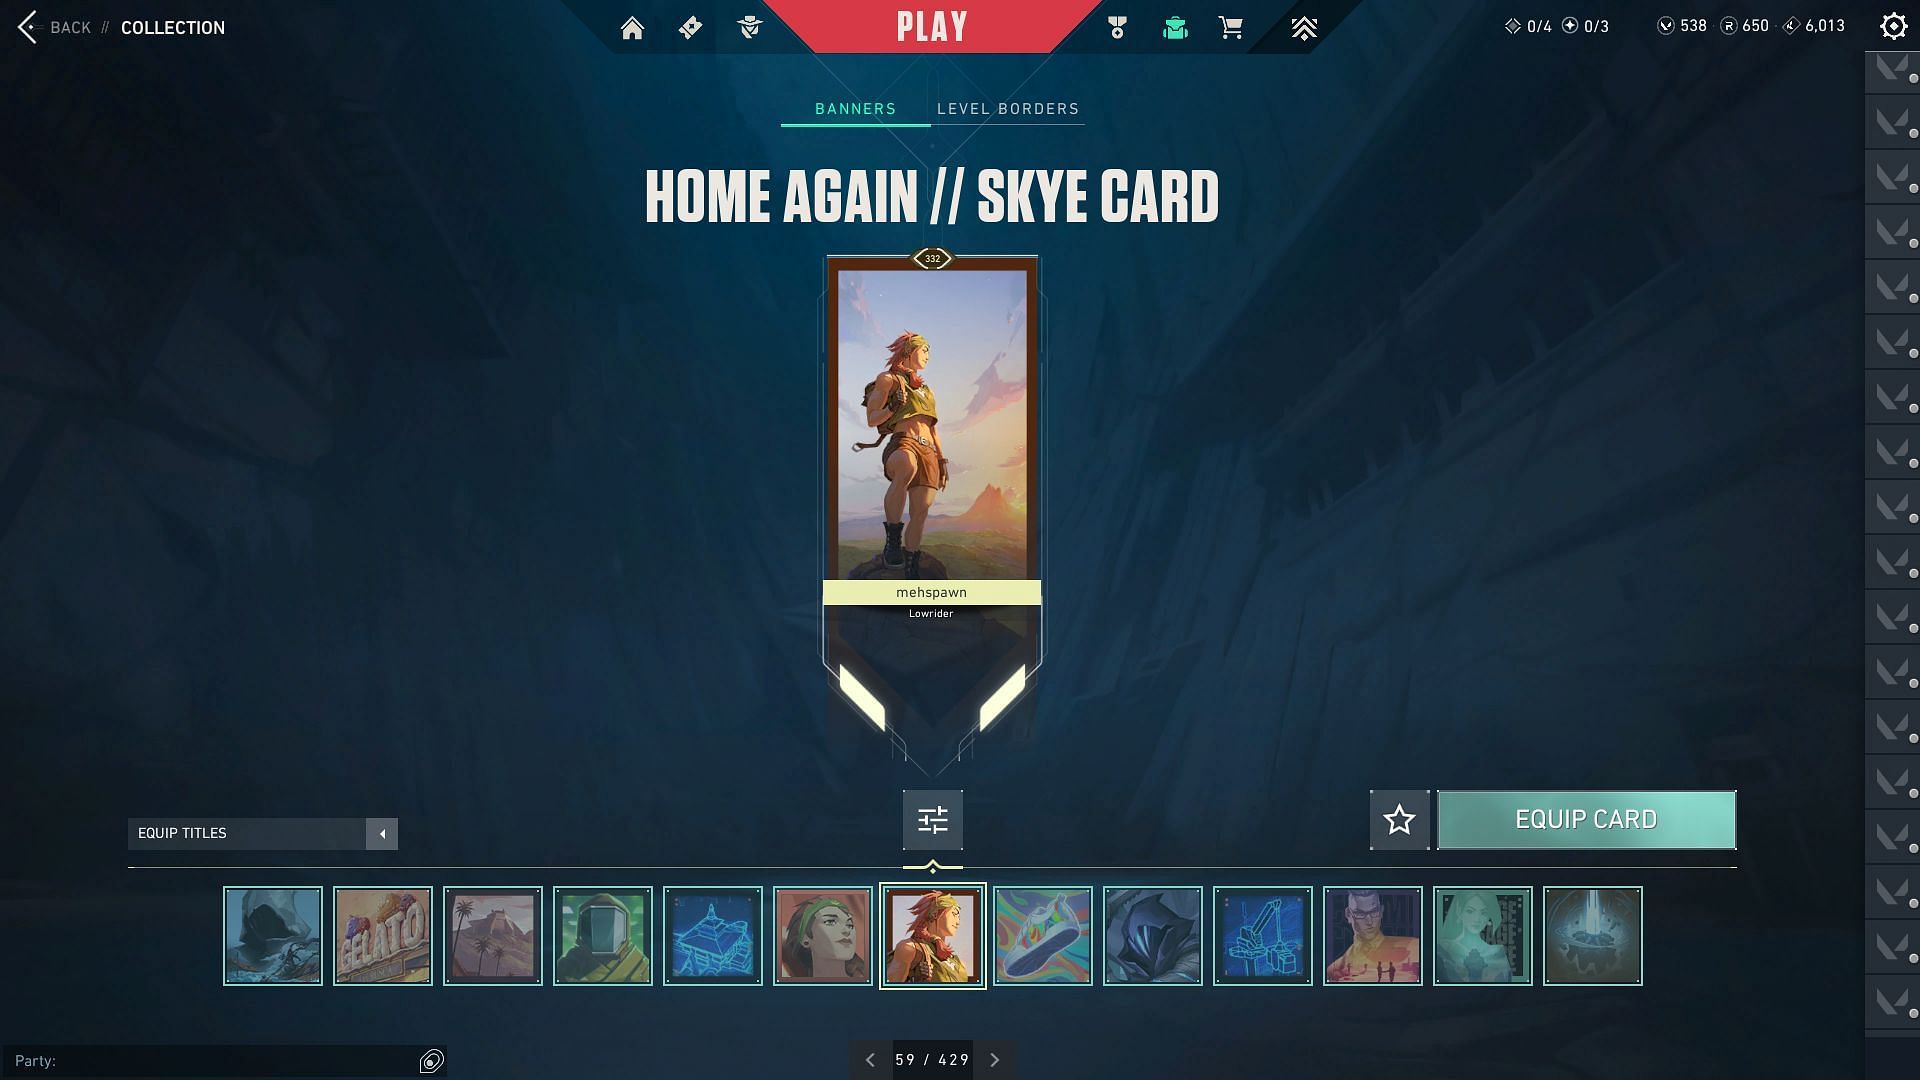 The Home Again Player Card for Skye (Image via Riot Games)